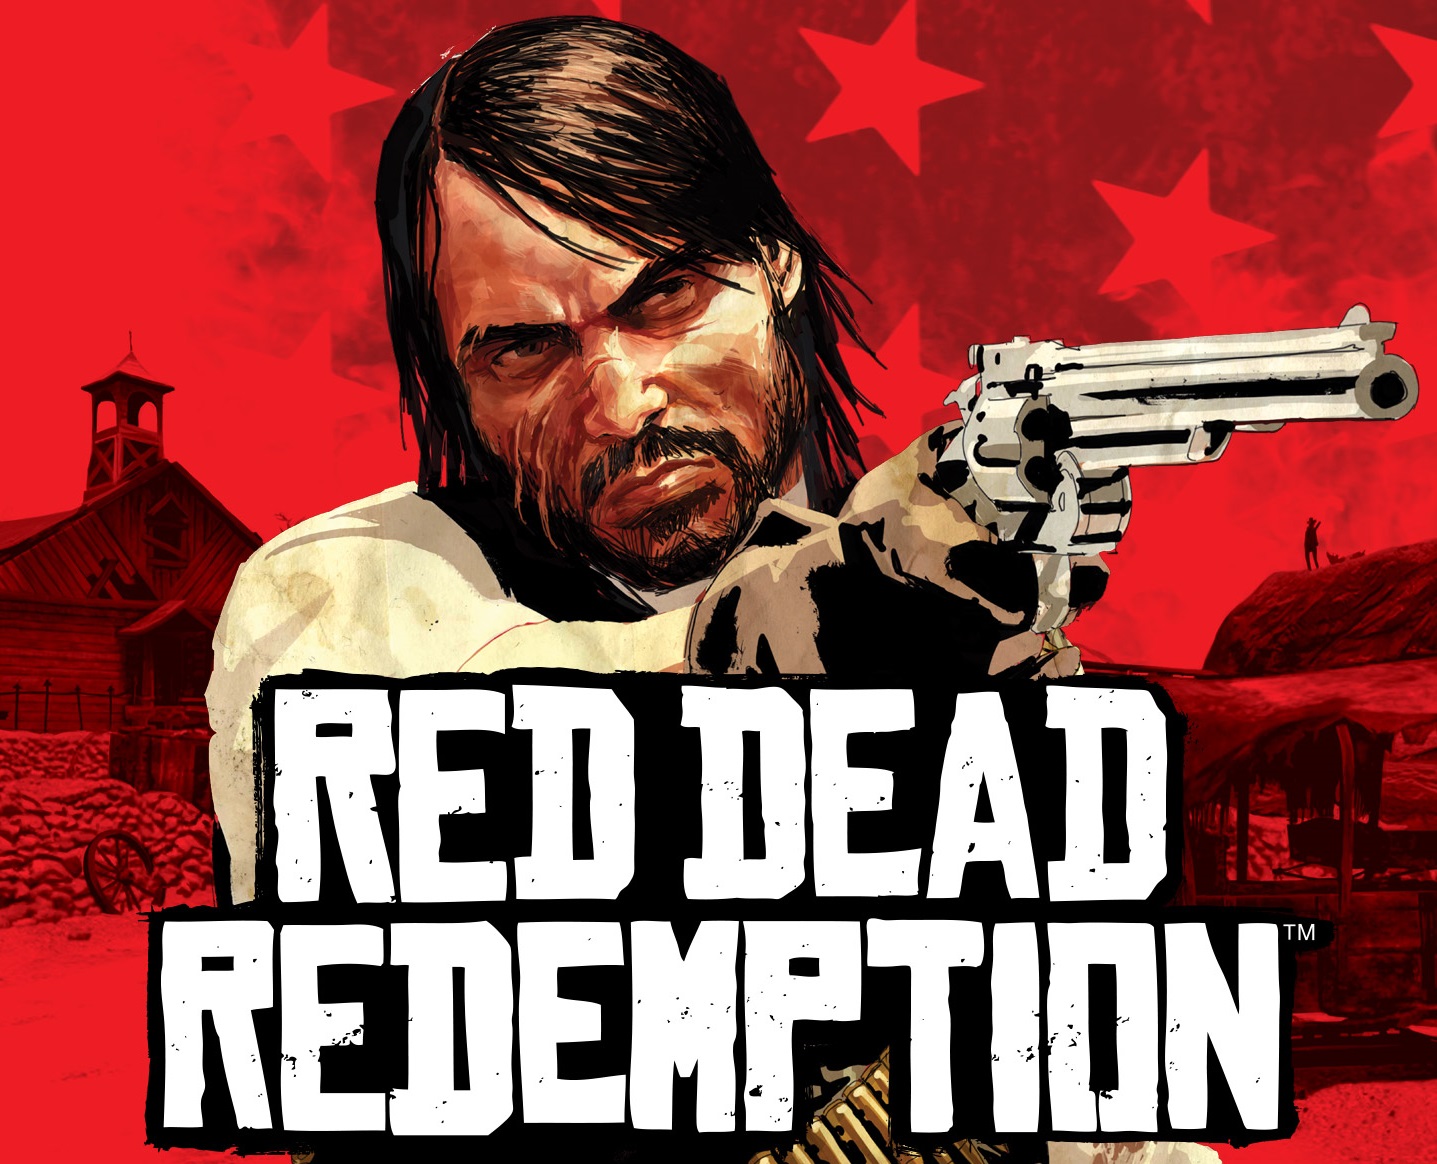 Xbox one игры red dead redemption. Red Dead Redemption 1. Red Dead Redemption Xbox 360. Red Dead Redemption Xbox 360 обложка. Red Dead Redemption 1 обложка.